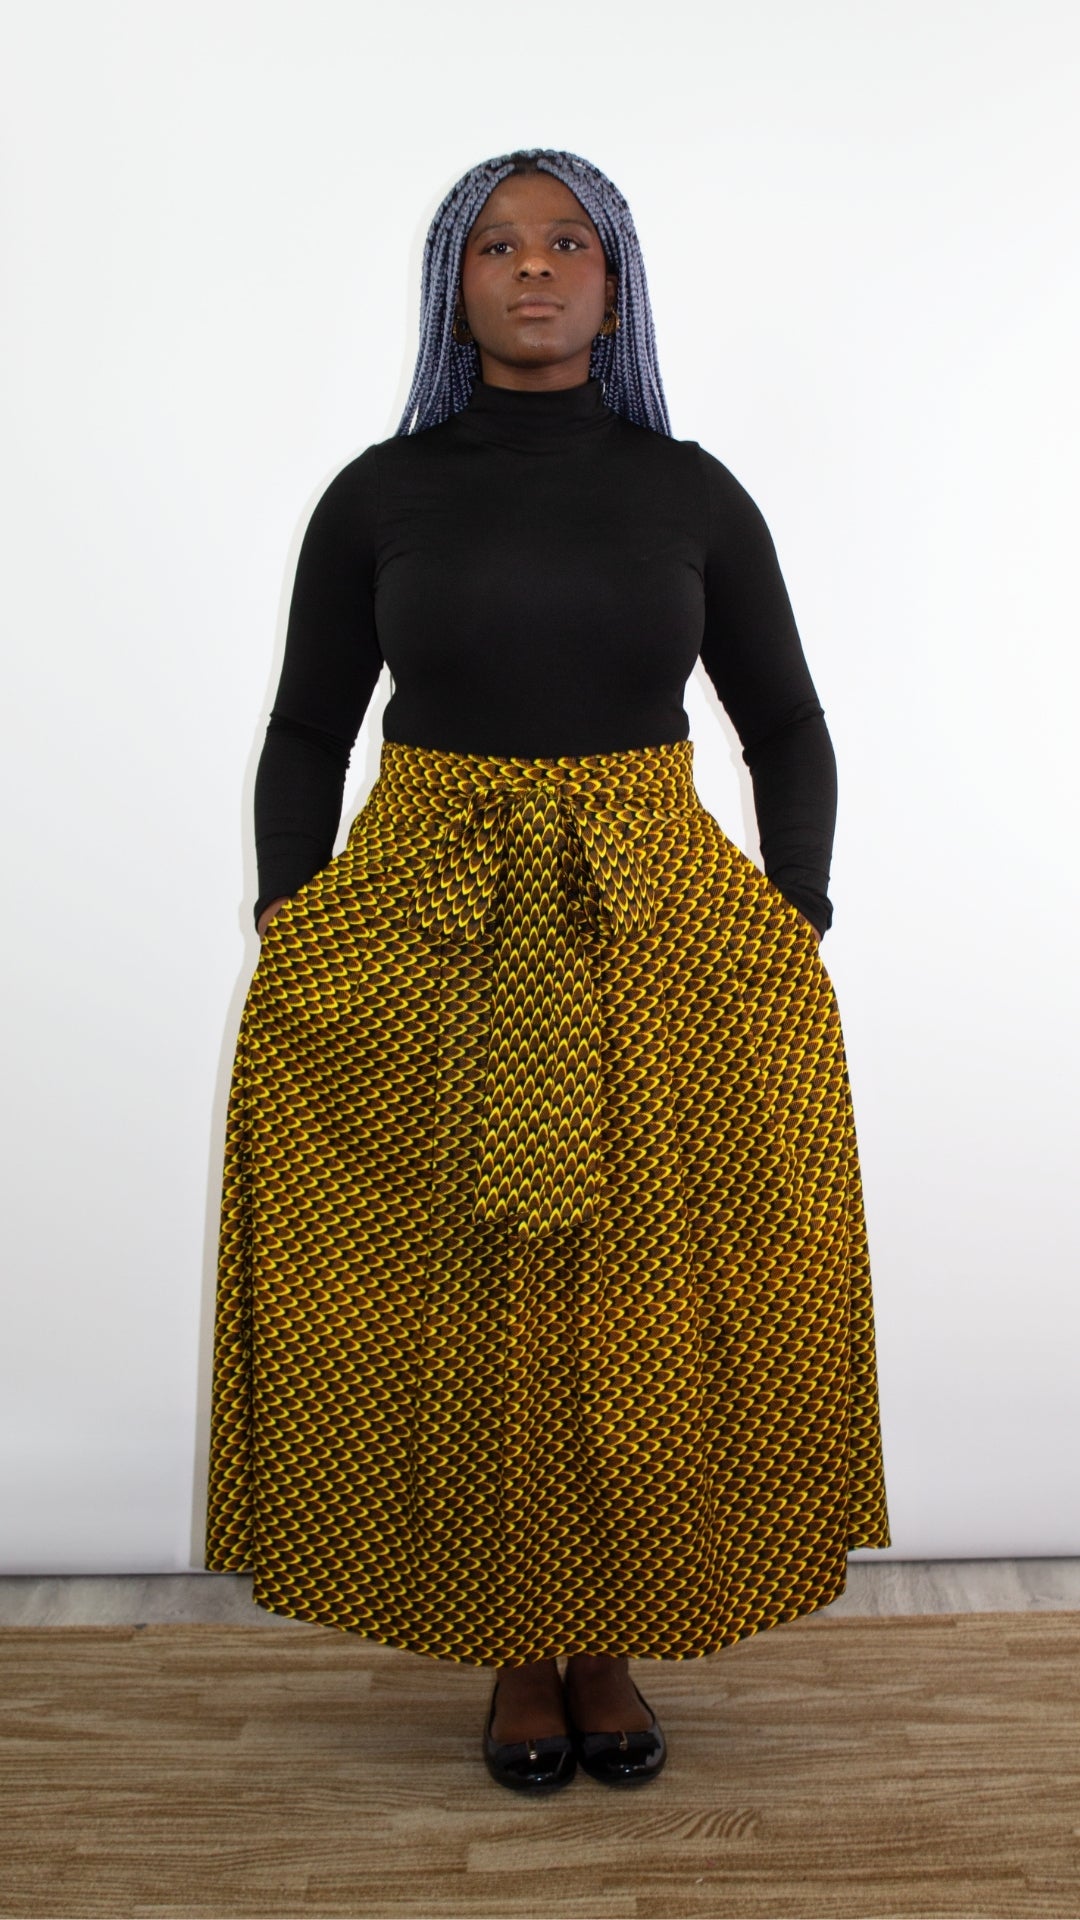 An edgy and stylish model with striking blue hair wearing a sleek black turtleneck paired with a statement yellow and black skirt adorned with a fashionable bow tie belt. The combination of bold colours and modern design creates a unique and eye-catching look.